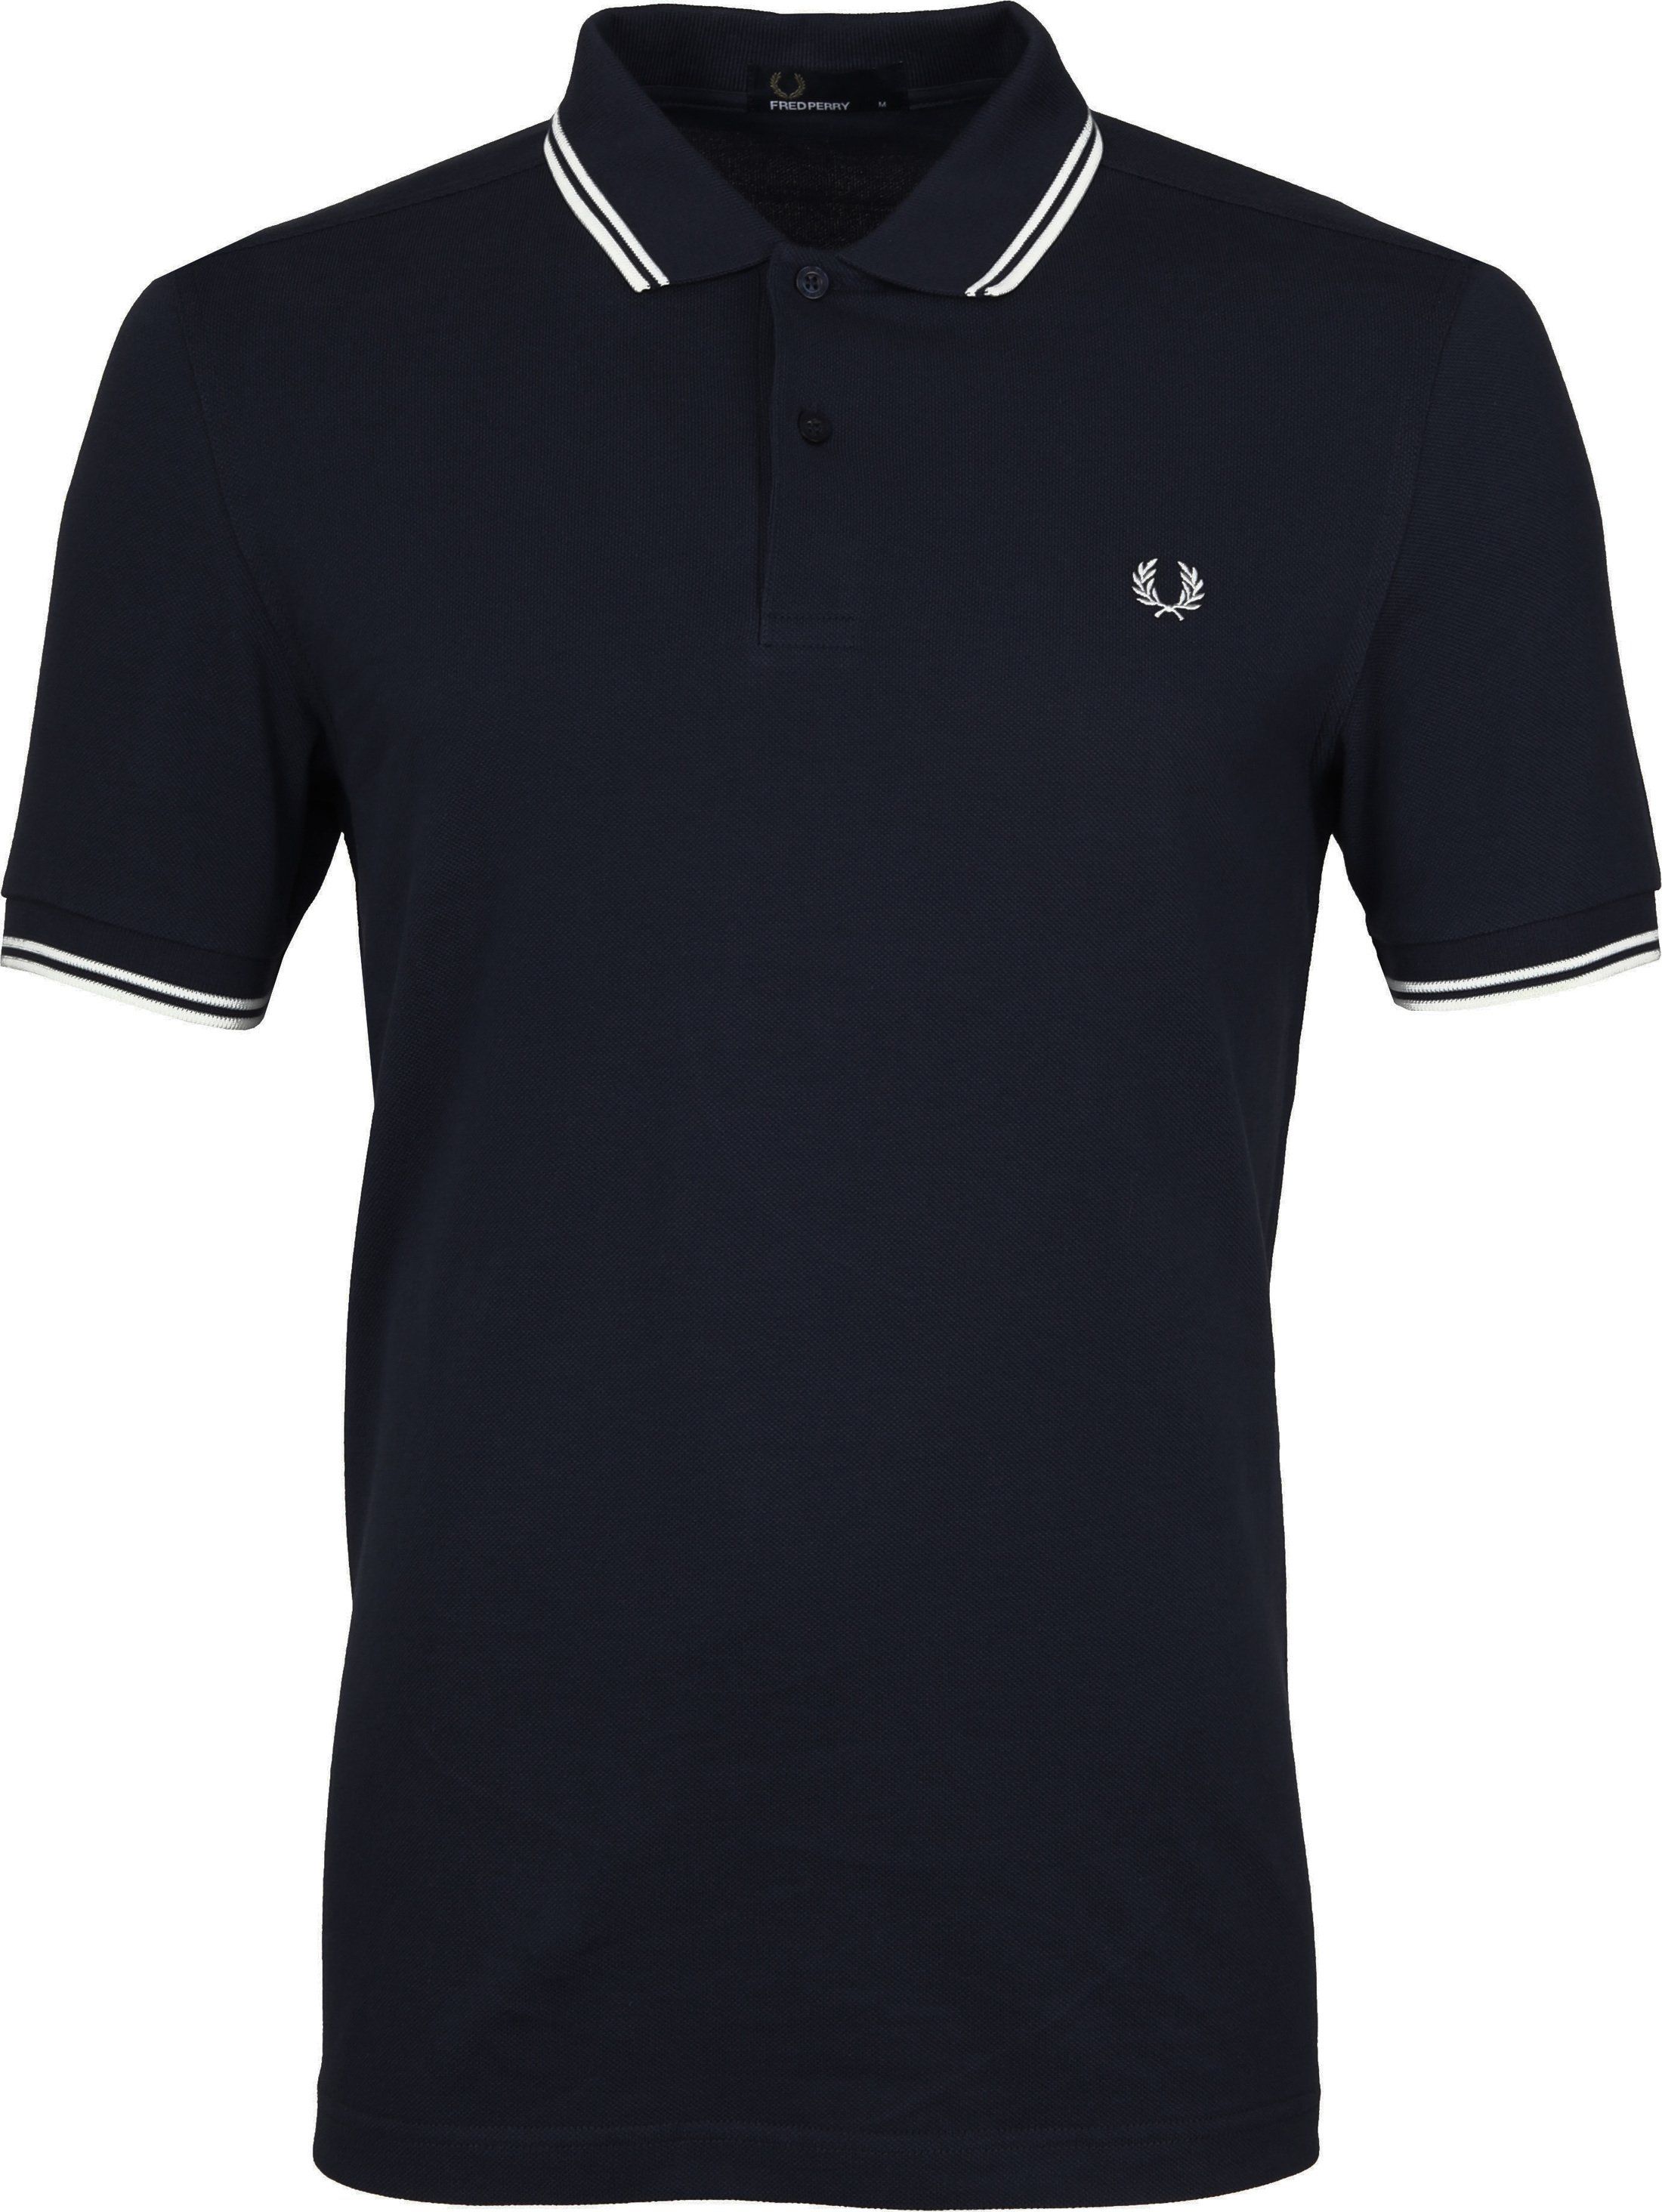 Fred Perry Polo Shirt Navy White Dark Blue Blue size M